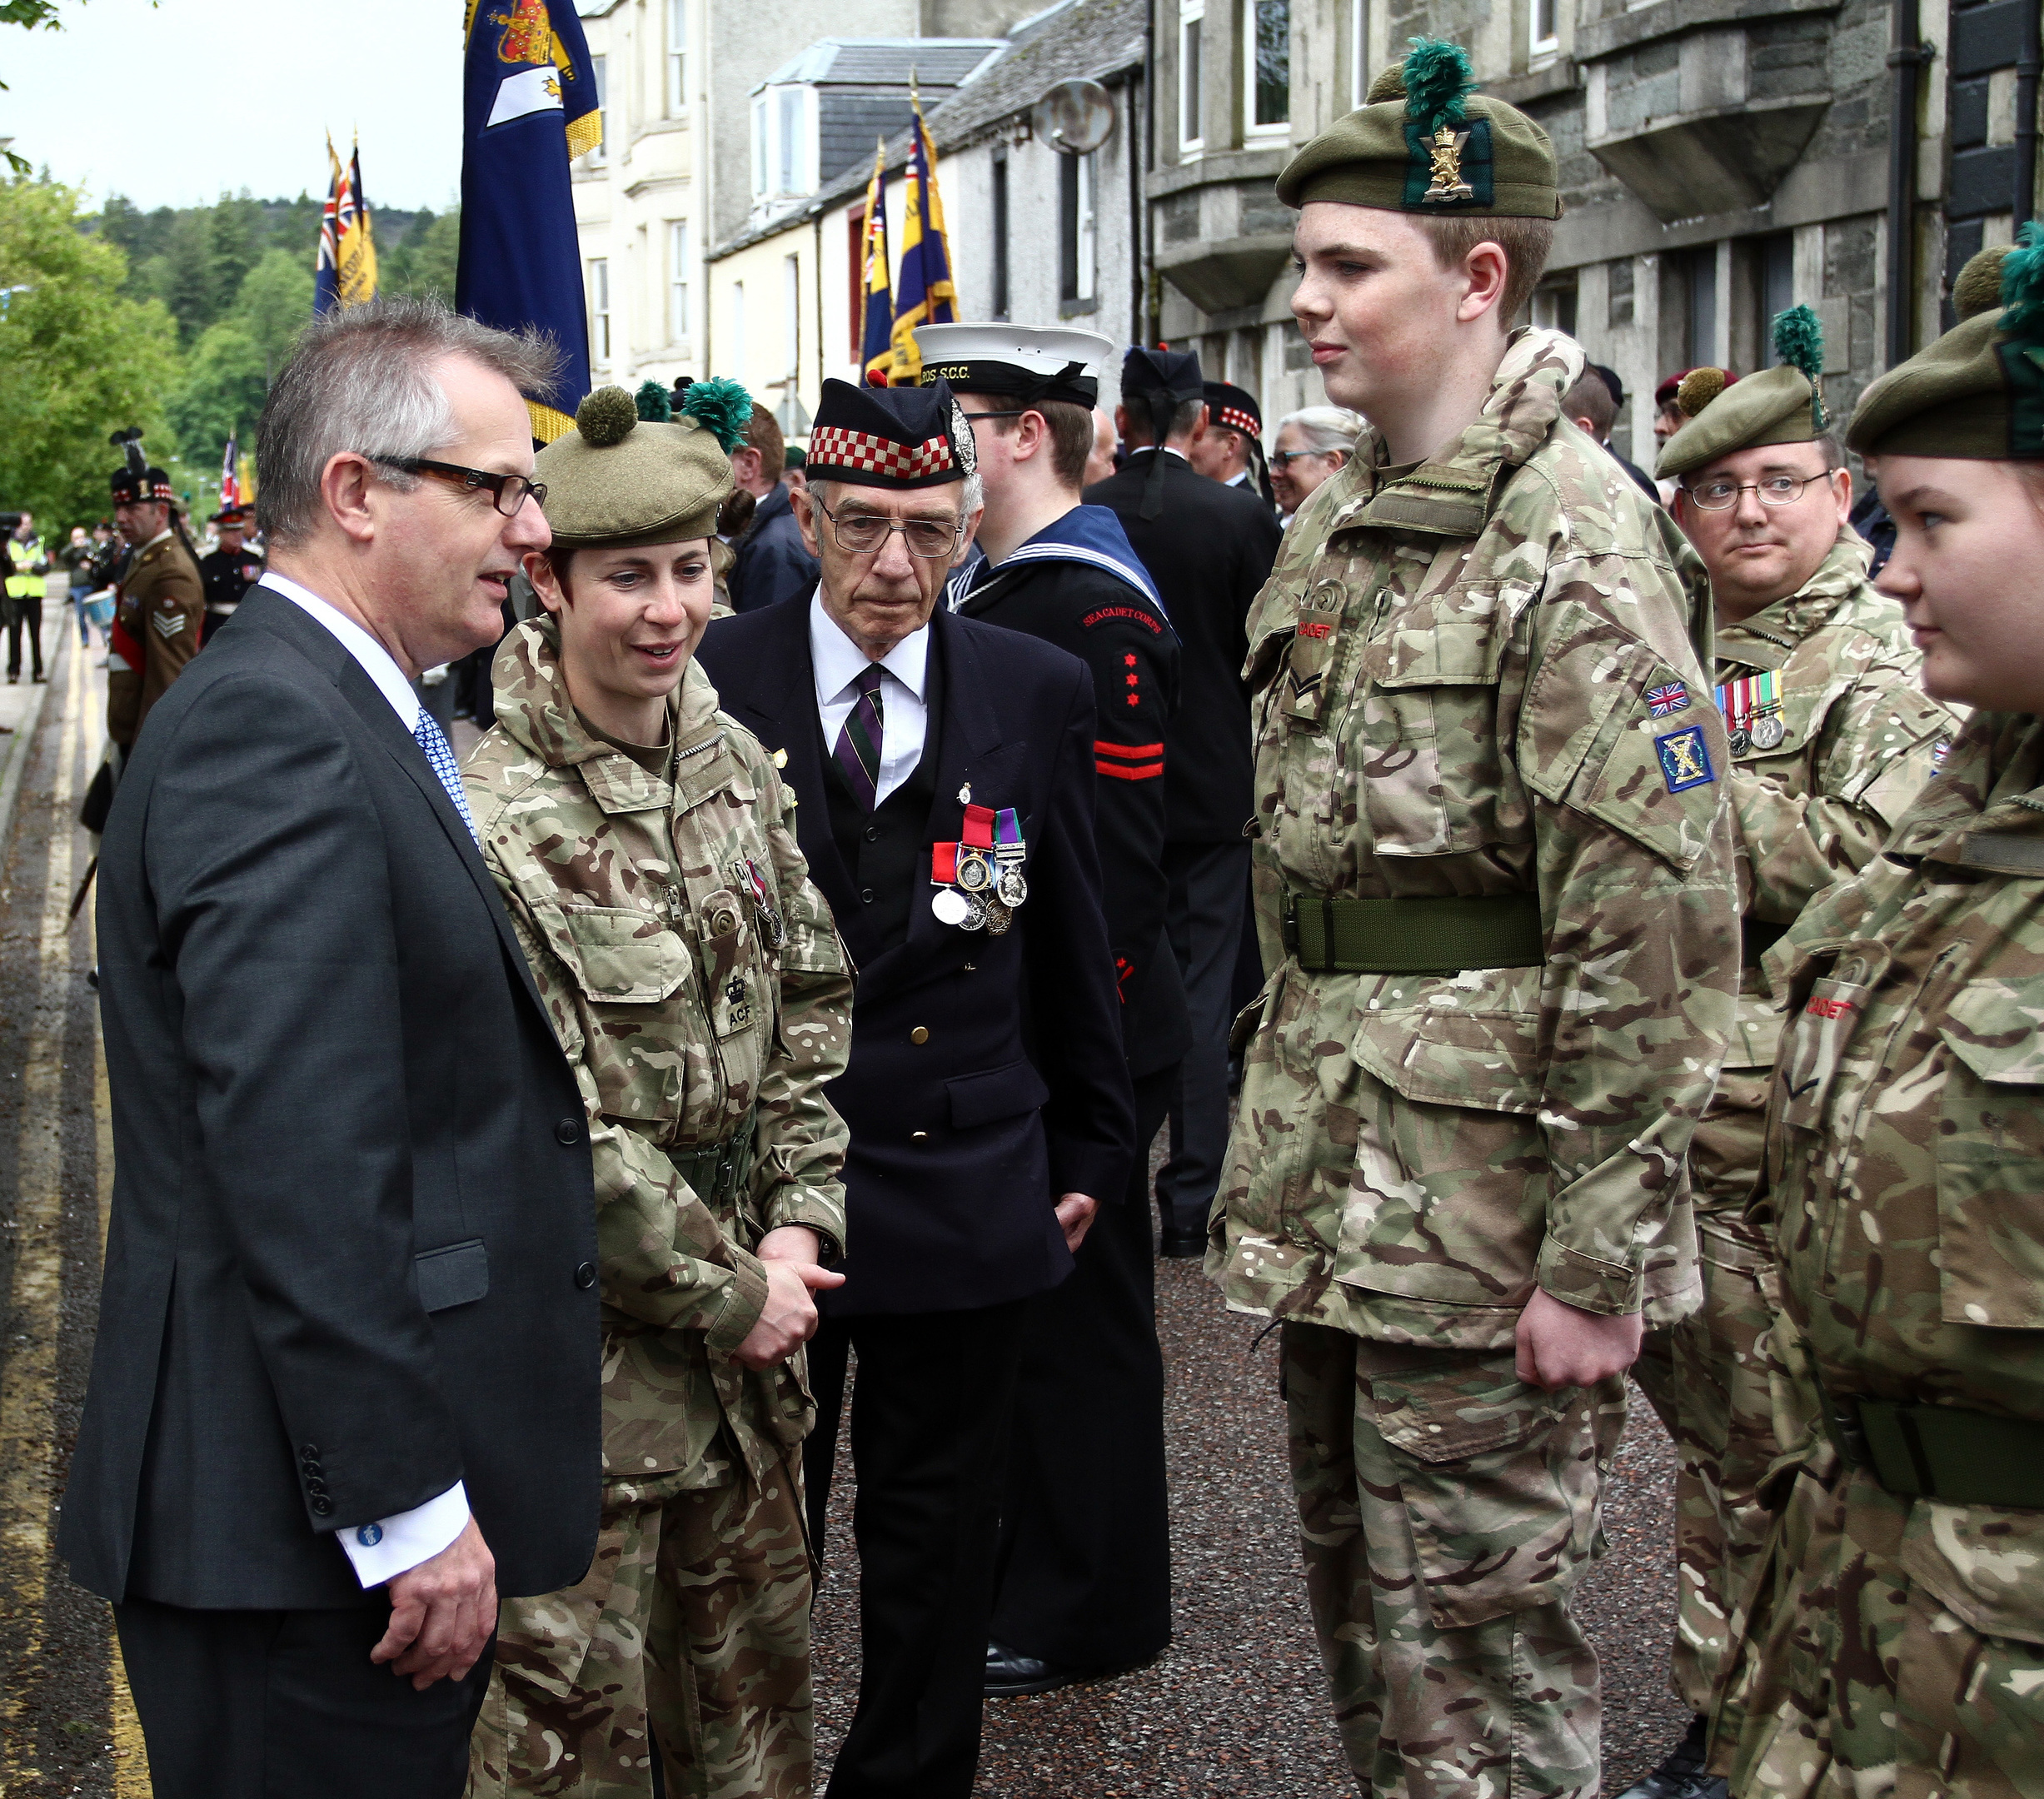 Brendan O'Hara MP argyll and bute inspects the cadets in colchester square lochgilphead .  Armed Forces Day where ex-service personnel march and celebrate being thanked for the sacrifices they have made picture kevin mcglynn